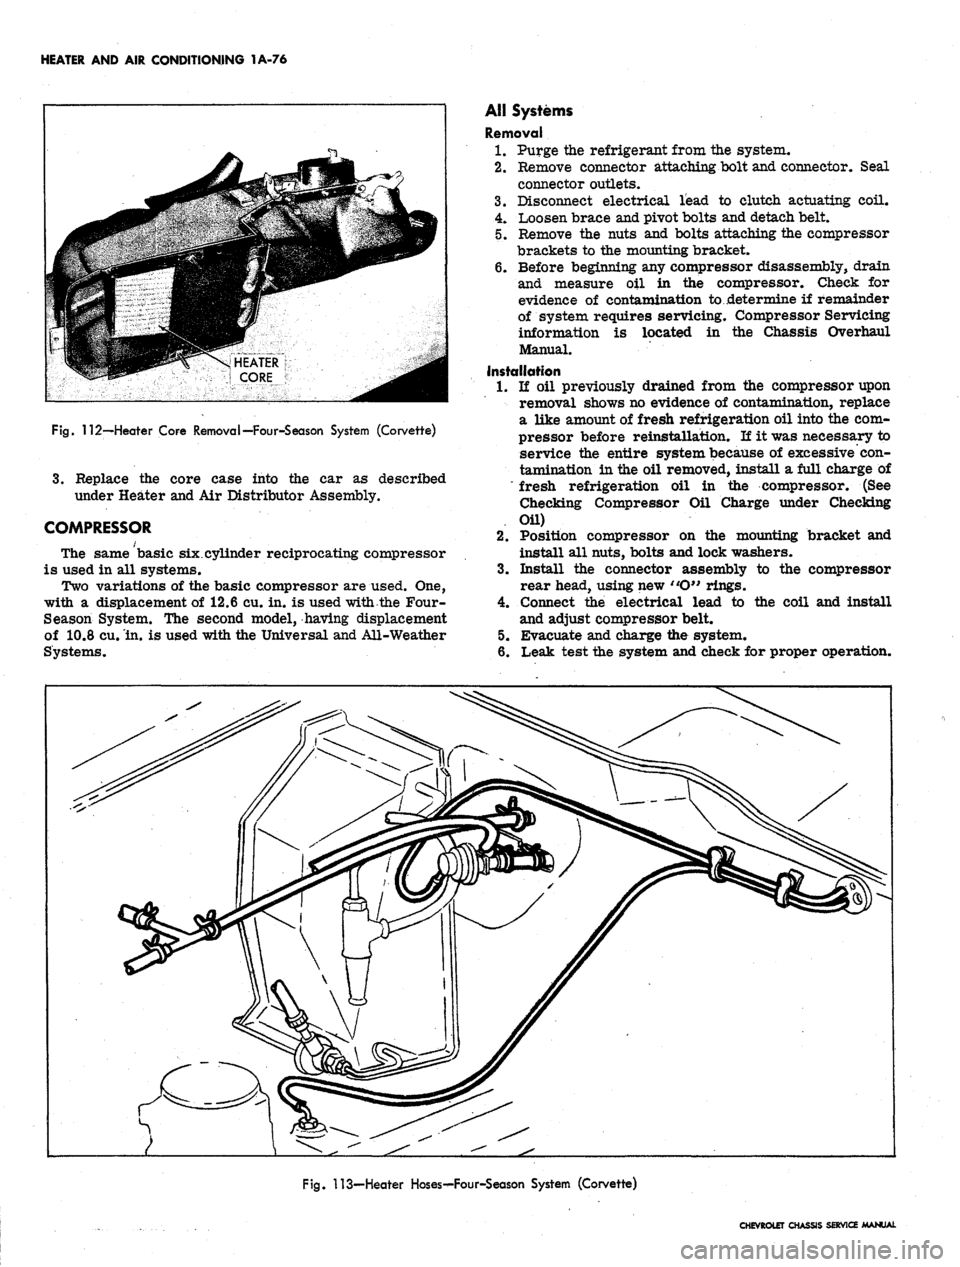 CHEVROLET CAMARO 1967 1.G Chassis Workshop Manual 
HEATER AND AIR CONDITIONING 1A-76

Fig.
 112—-Heater Core Removal—Four-Season System (Corvette)

3.
 Replace the core case into the car as described

under Heater and Air Distributor Assembly.

C